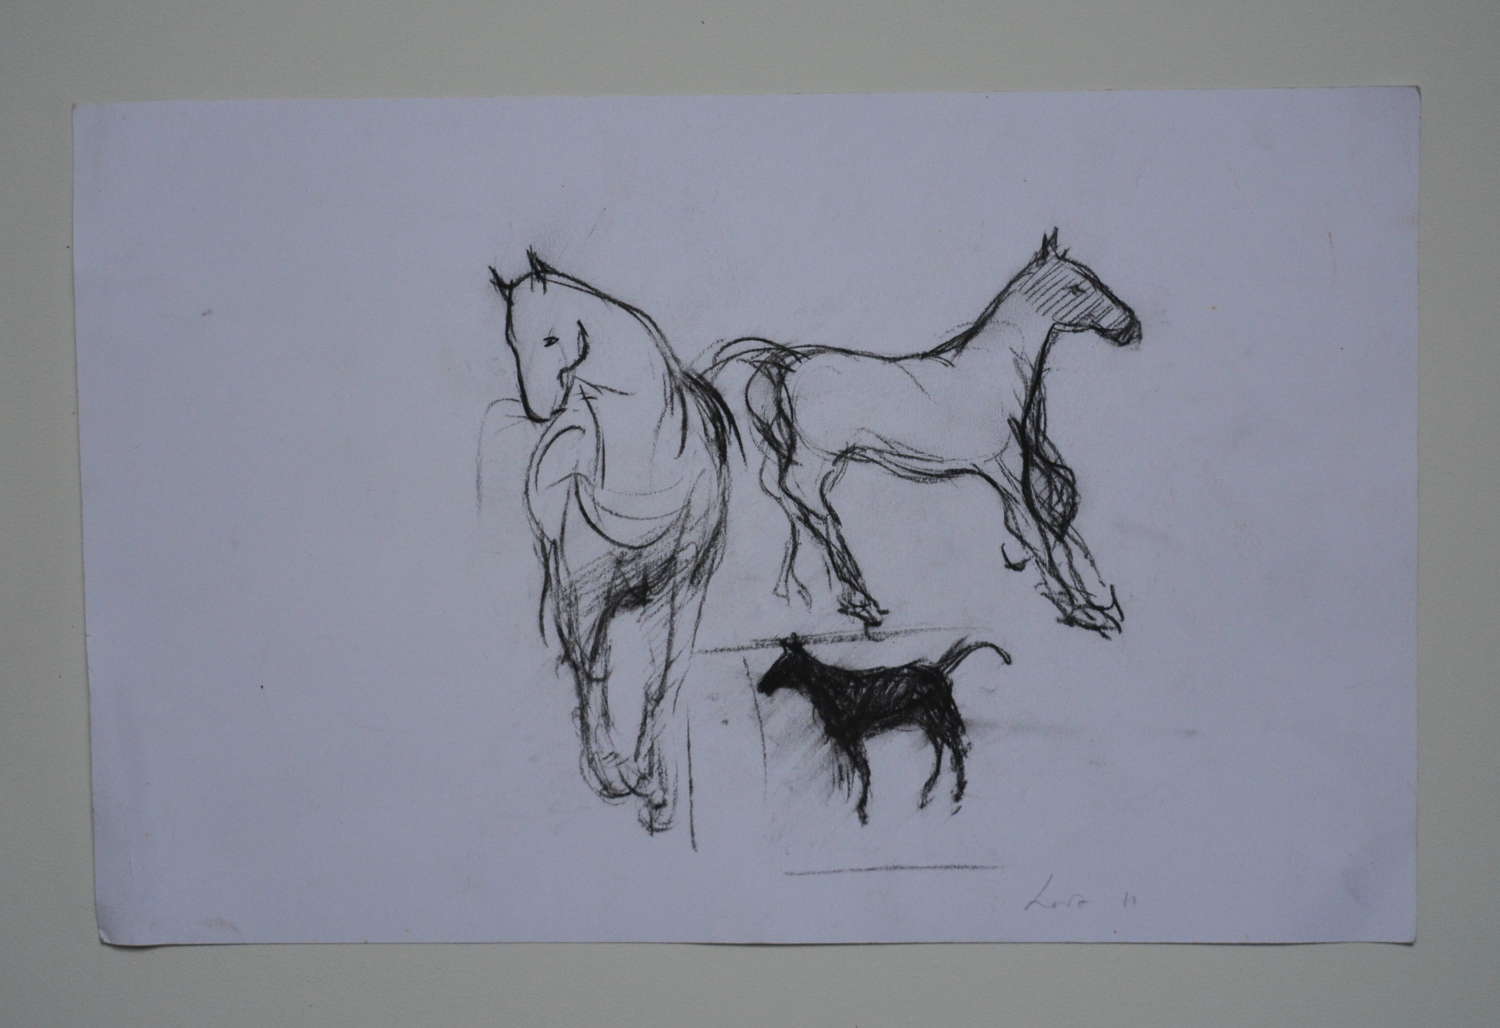 STUDY OF HORSES AND DOG BY KAREN LORENZ